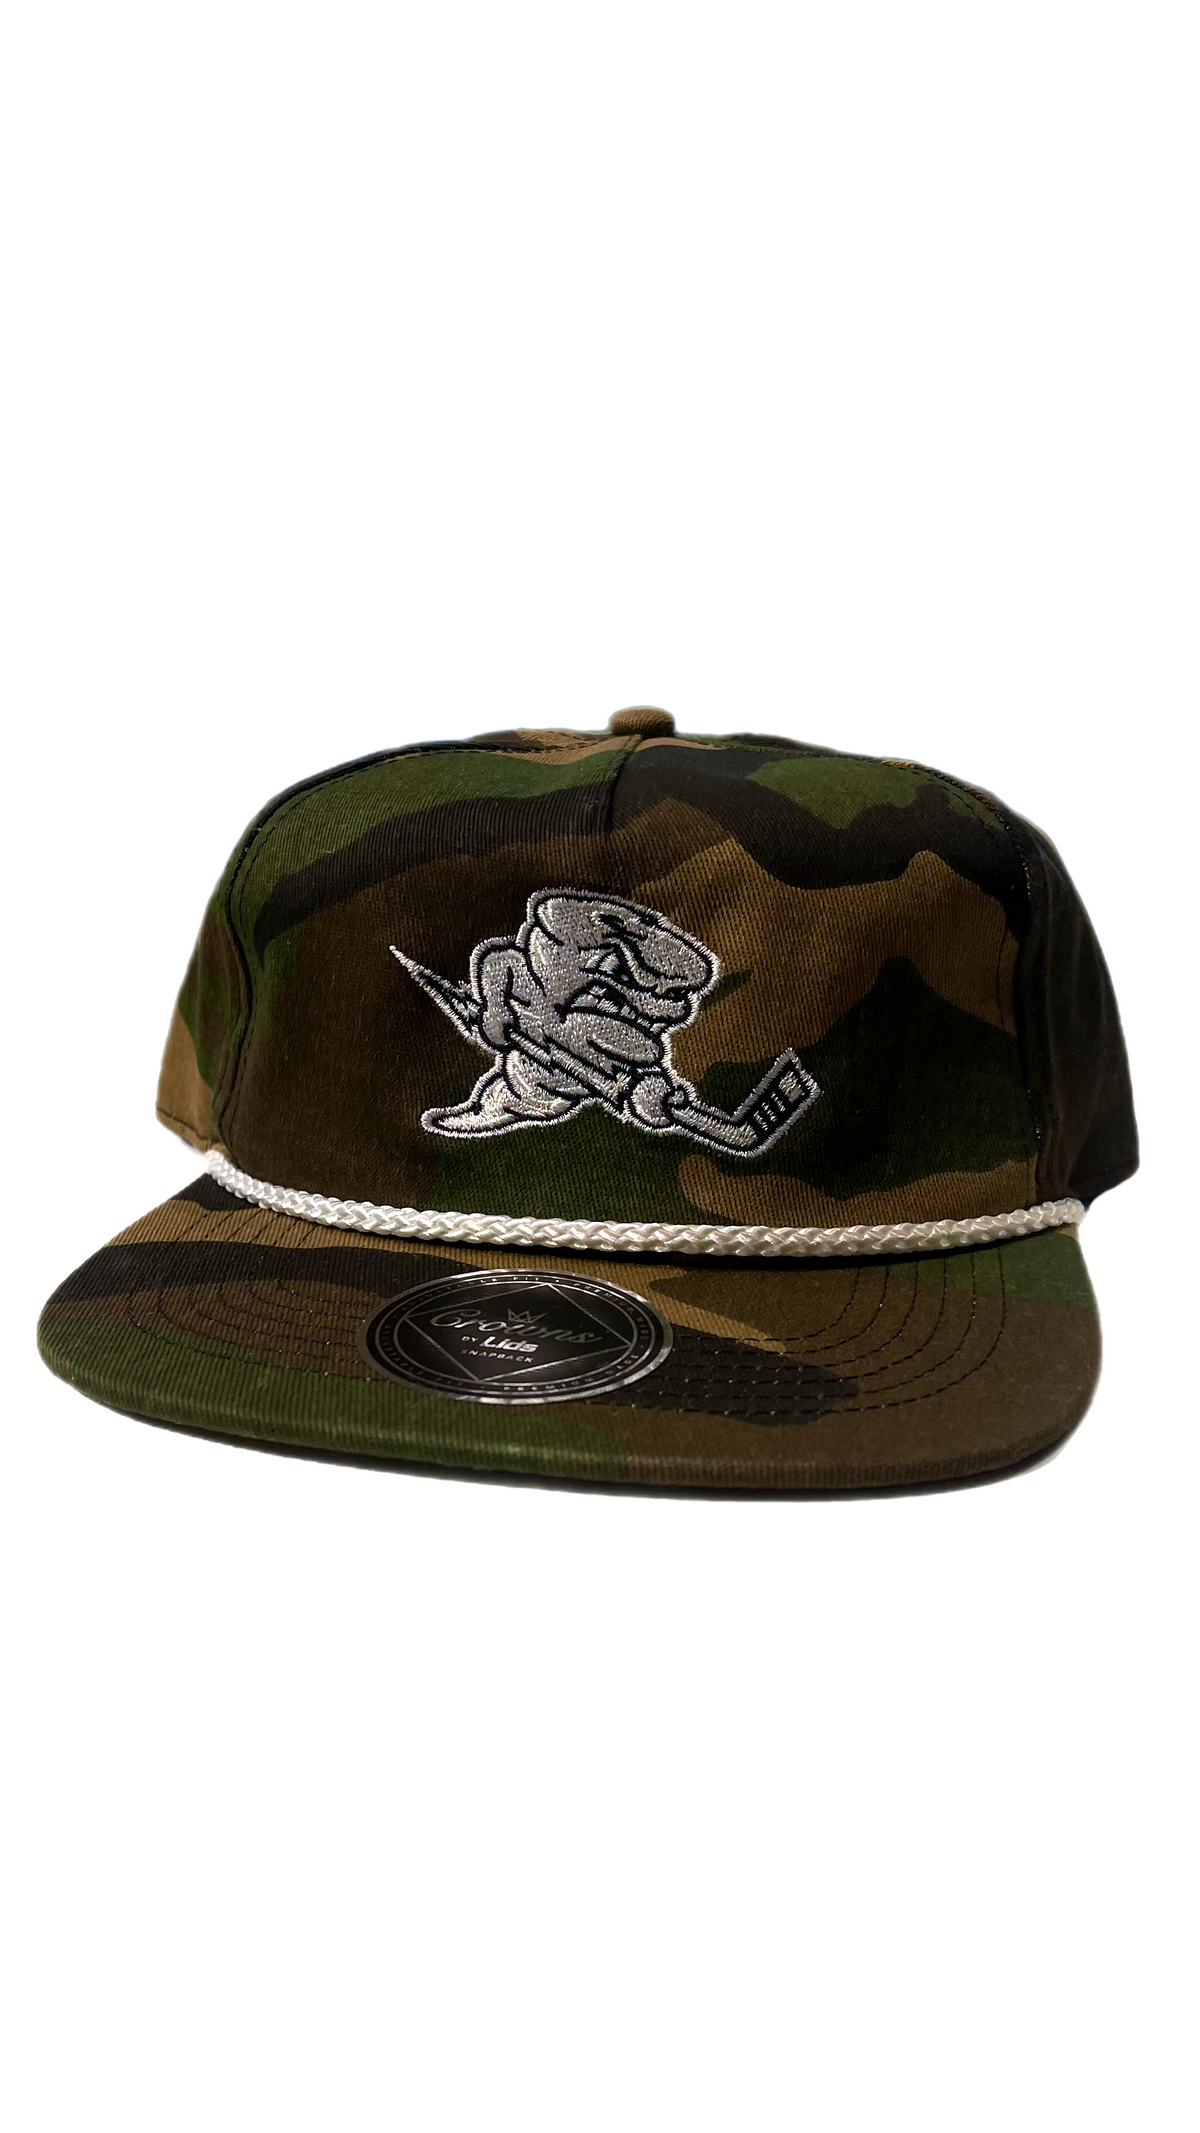 Crowns Camo Hat With Silver Twisty